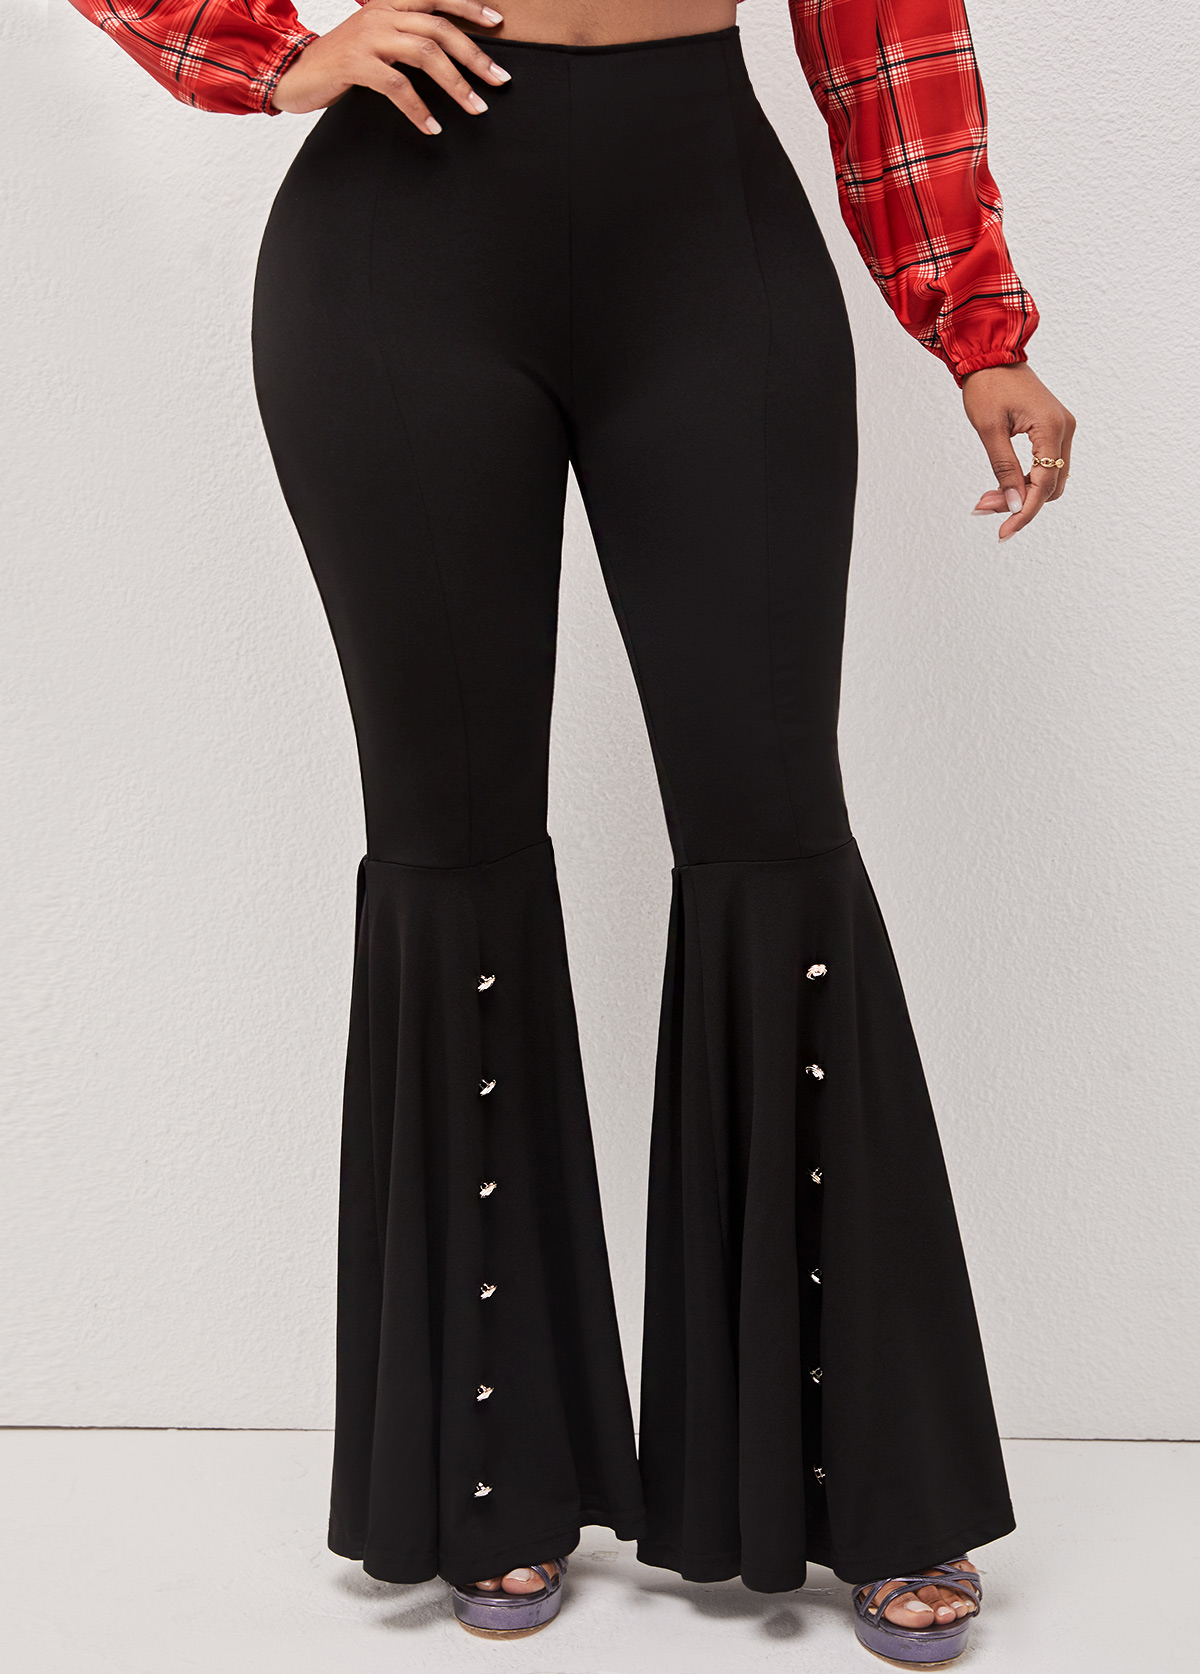 High Waisted Decorative Button Black Flare Pants